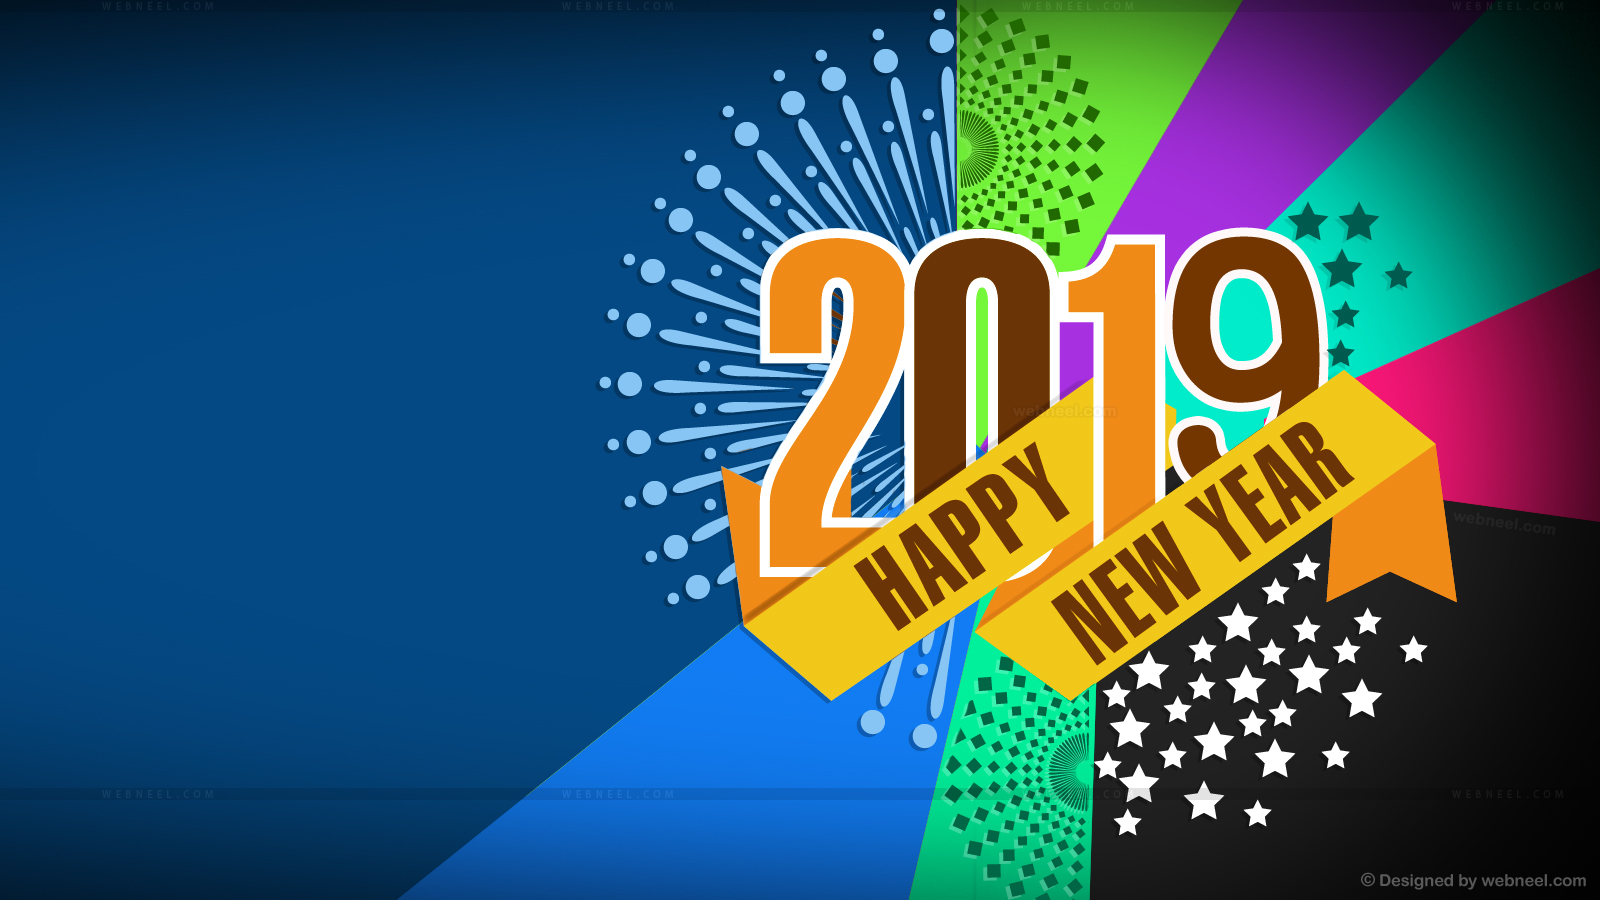 happy new year wallpaper,text,graphic design,font,illustration,design